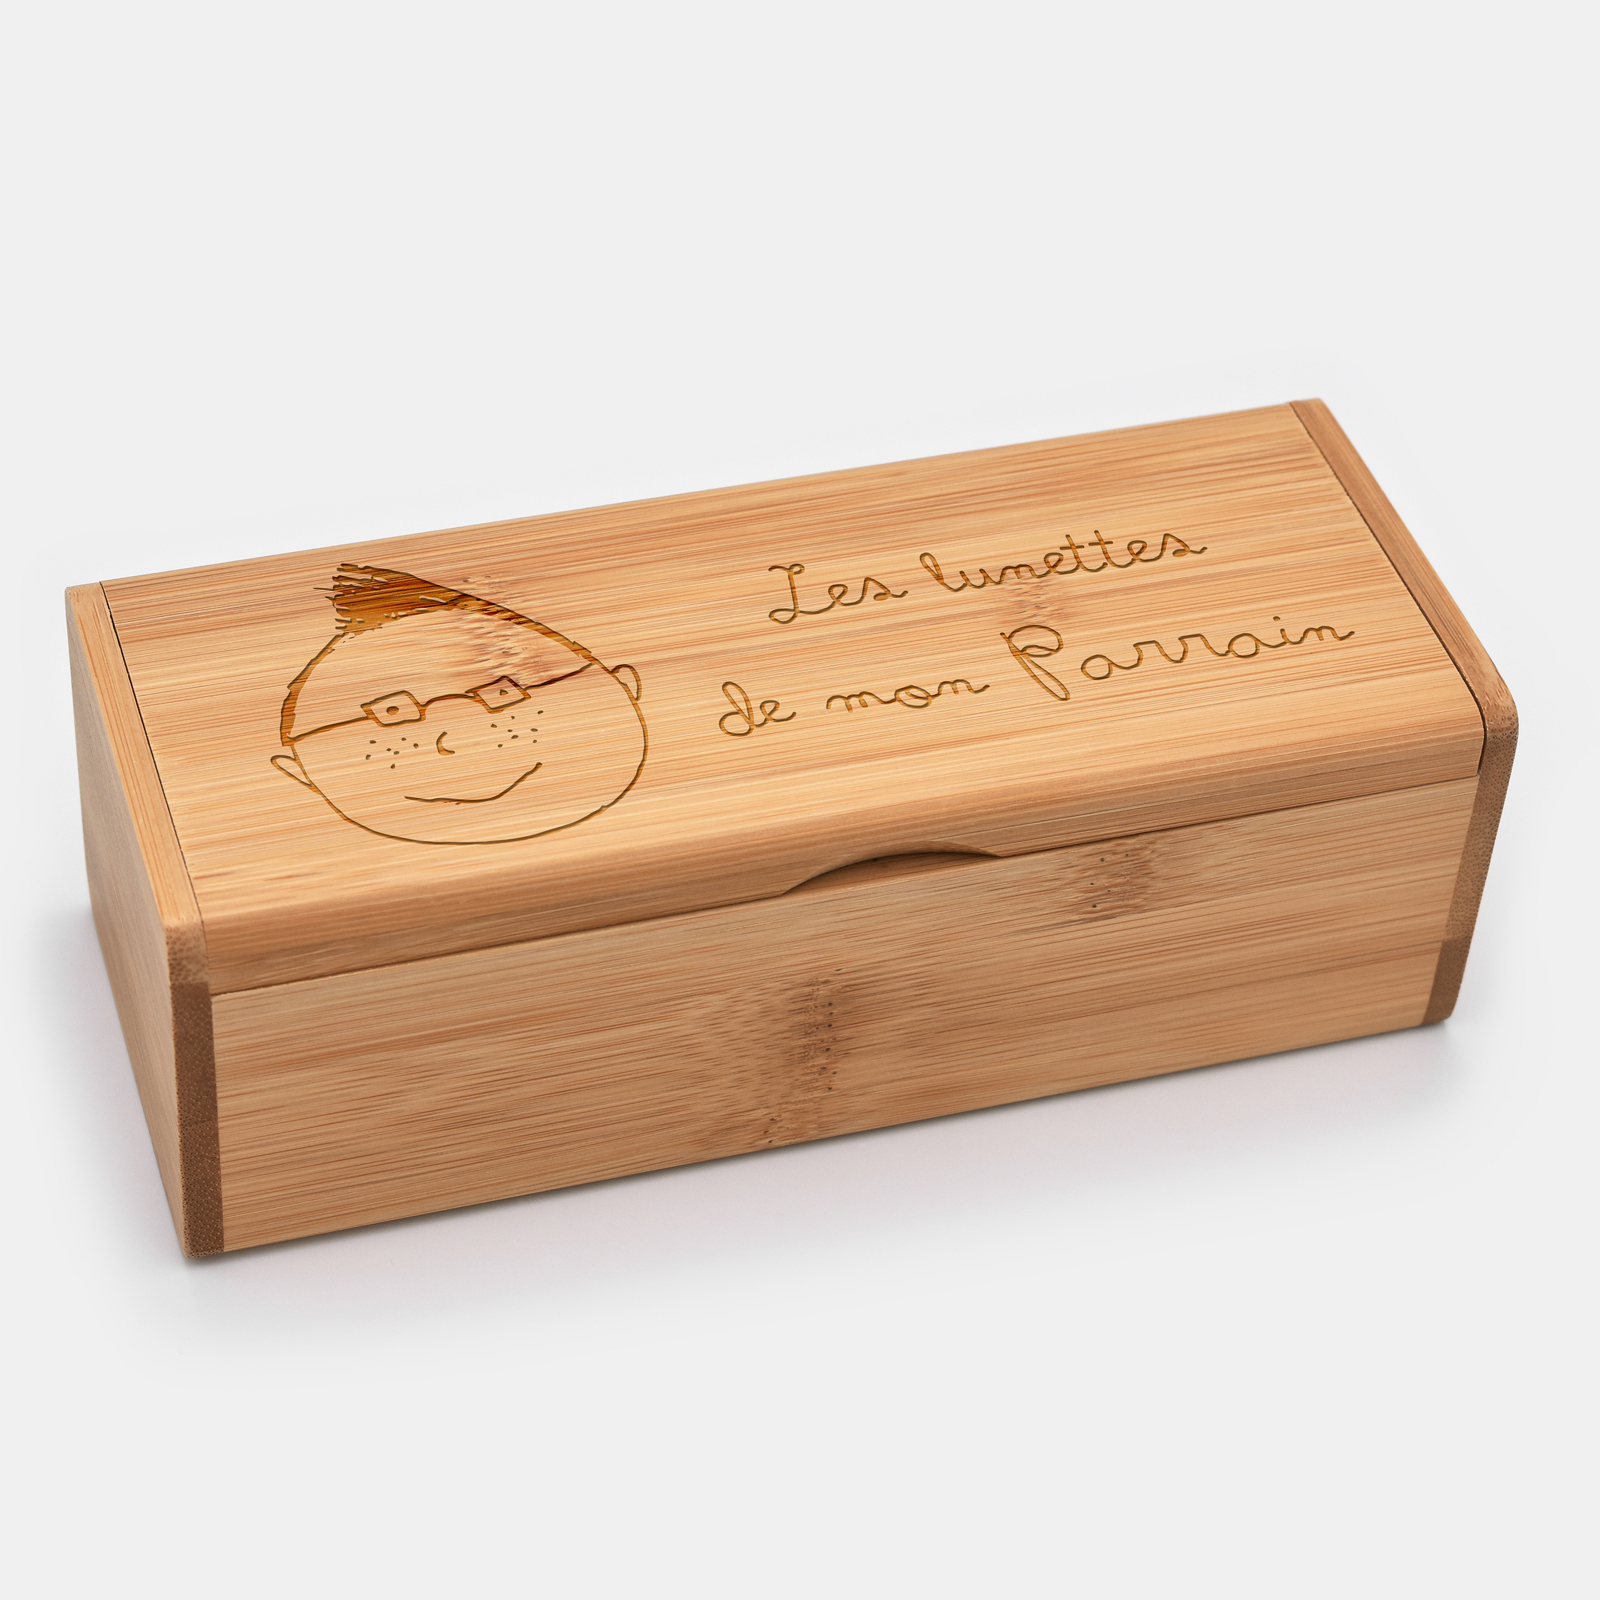 Personalised engraved wooden glasses-case - Our little imperfections